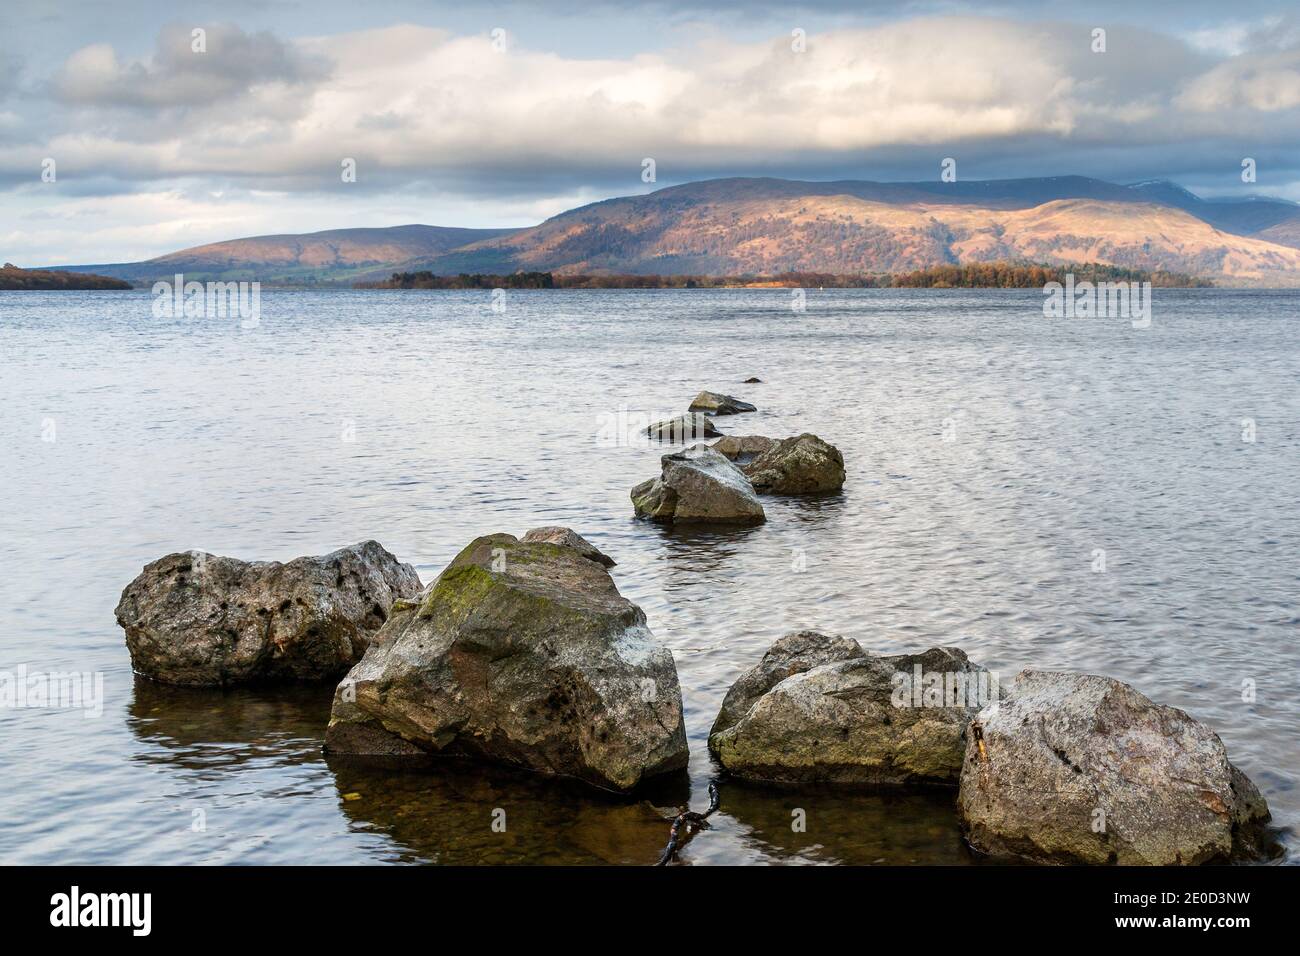 Milarrochy Bay on the shores of Loch Lomond, Loch Lomond and the Trossachs National Park, Scotland. Stock Photo